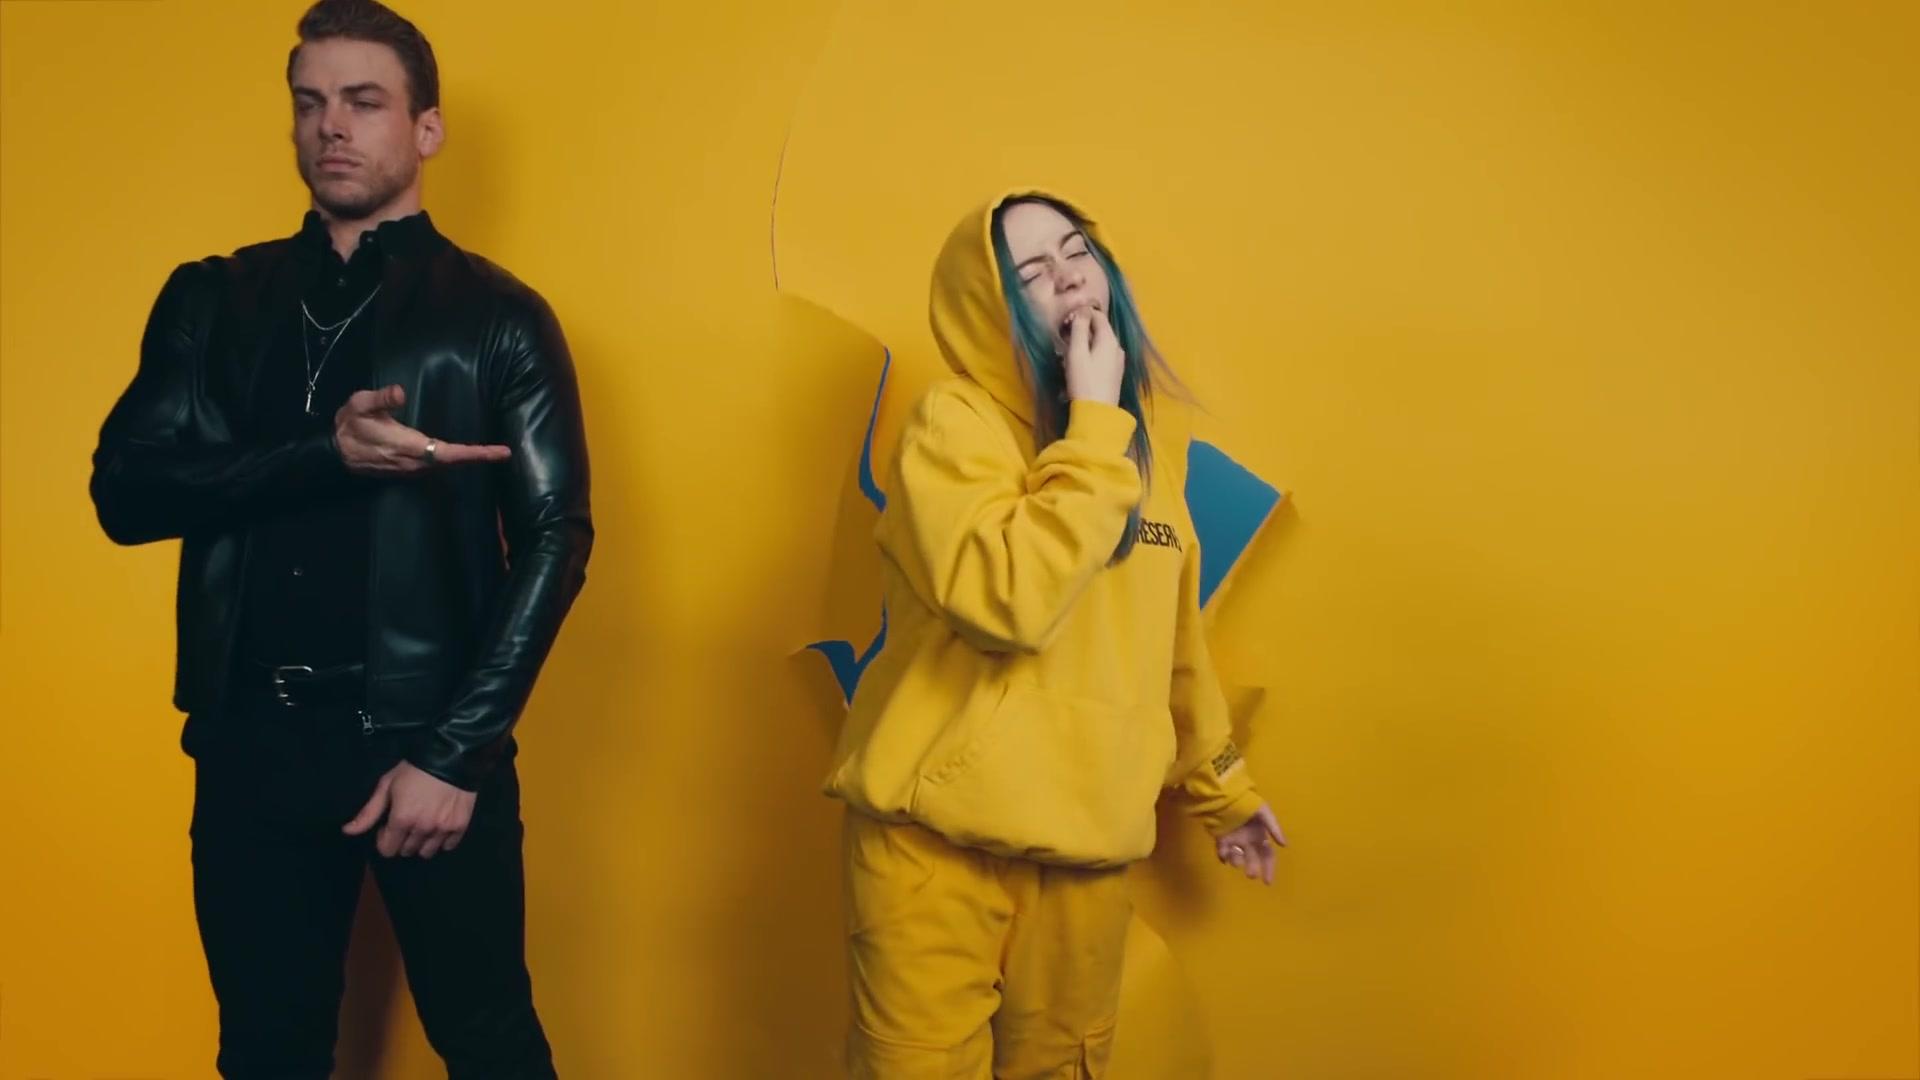 Outfits in Bad Guy by Billie Eilish Music Video